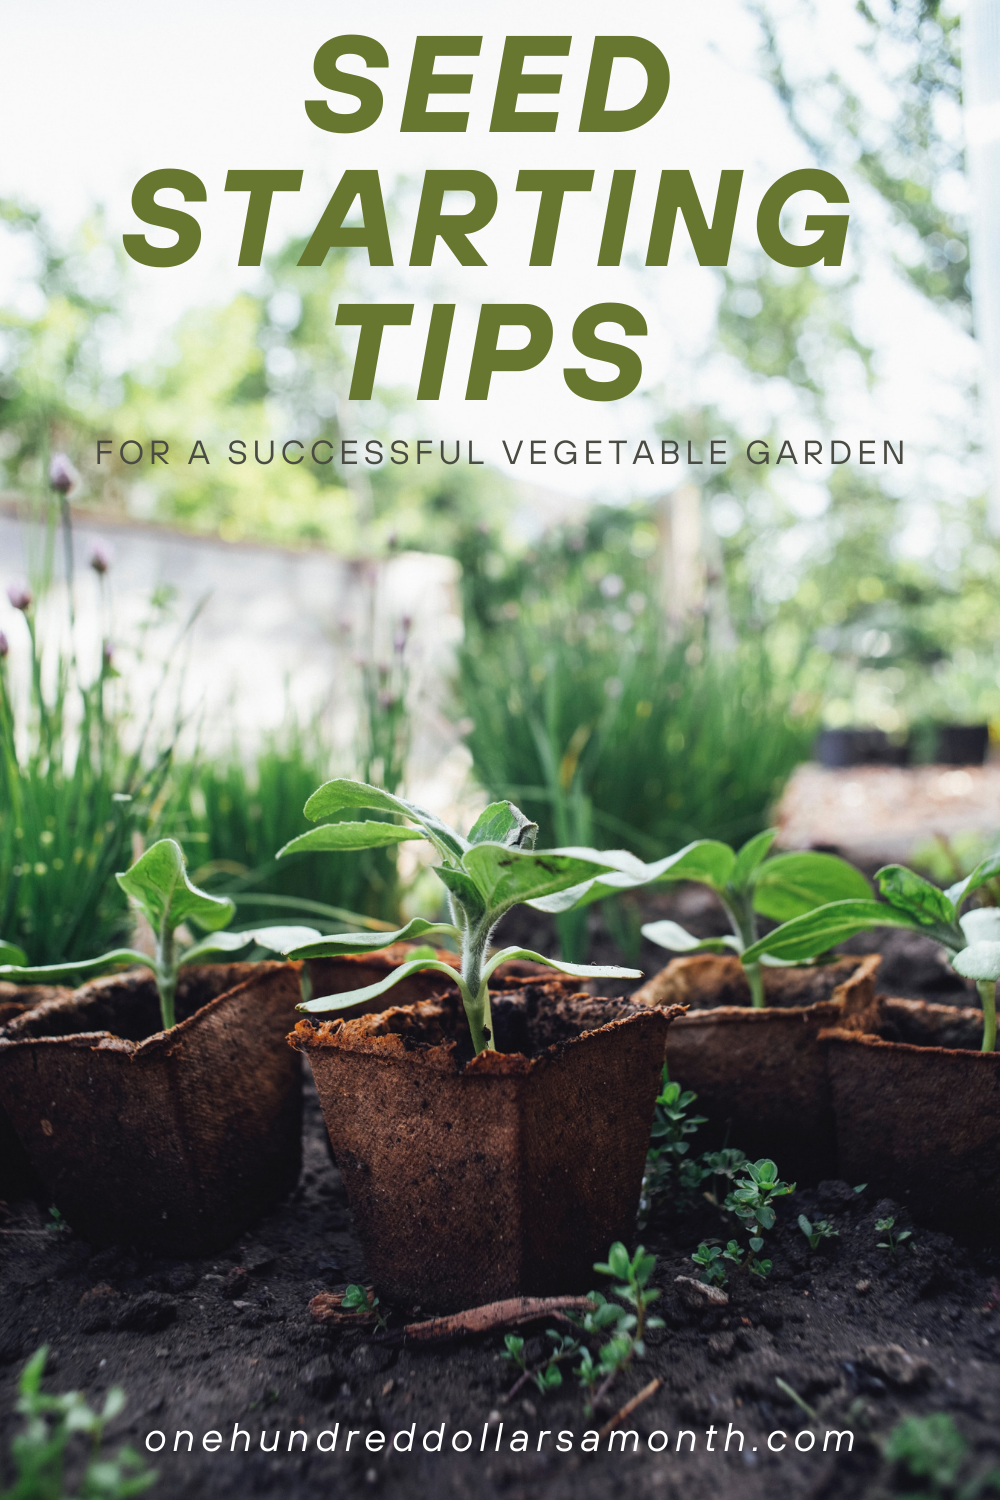 Seed Starting Tips For a Successful Vegetable Garden